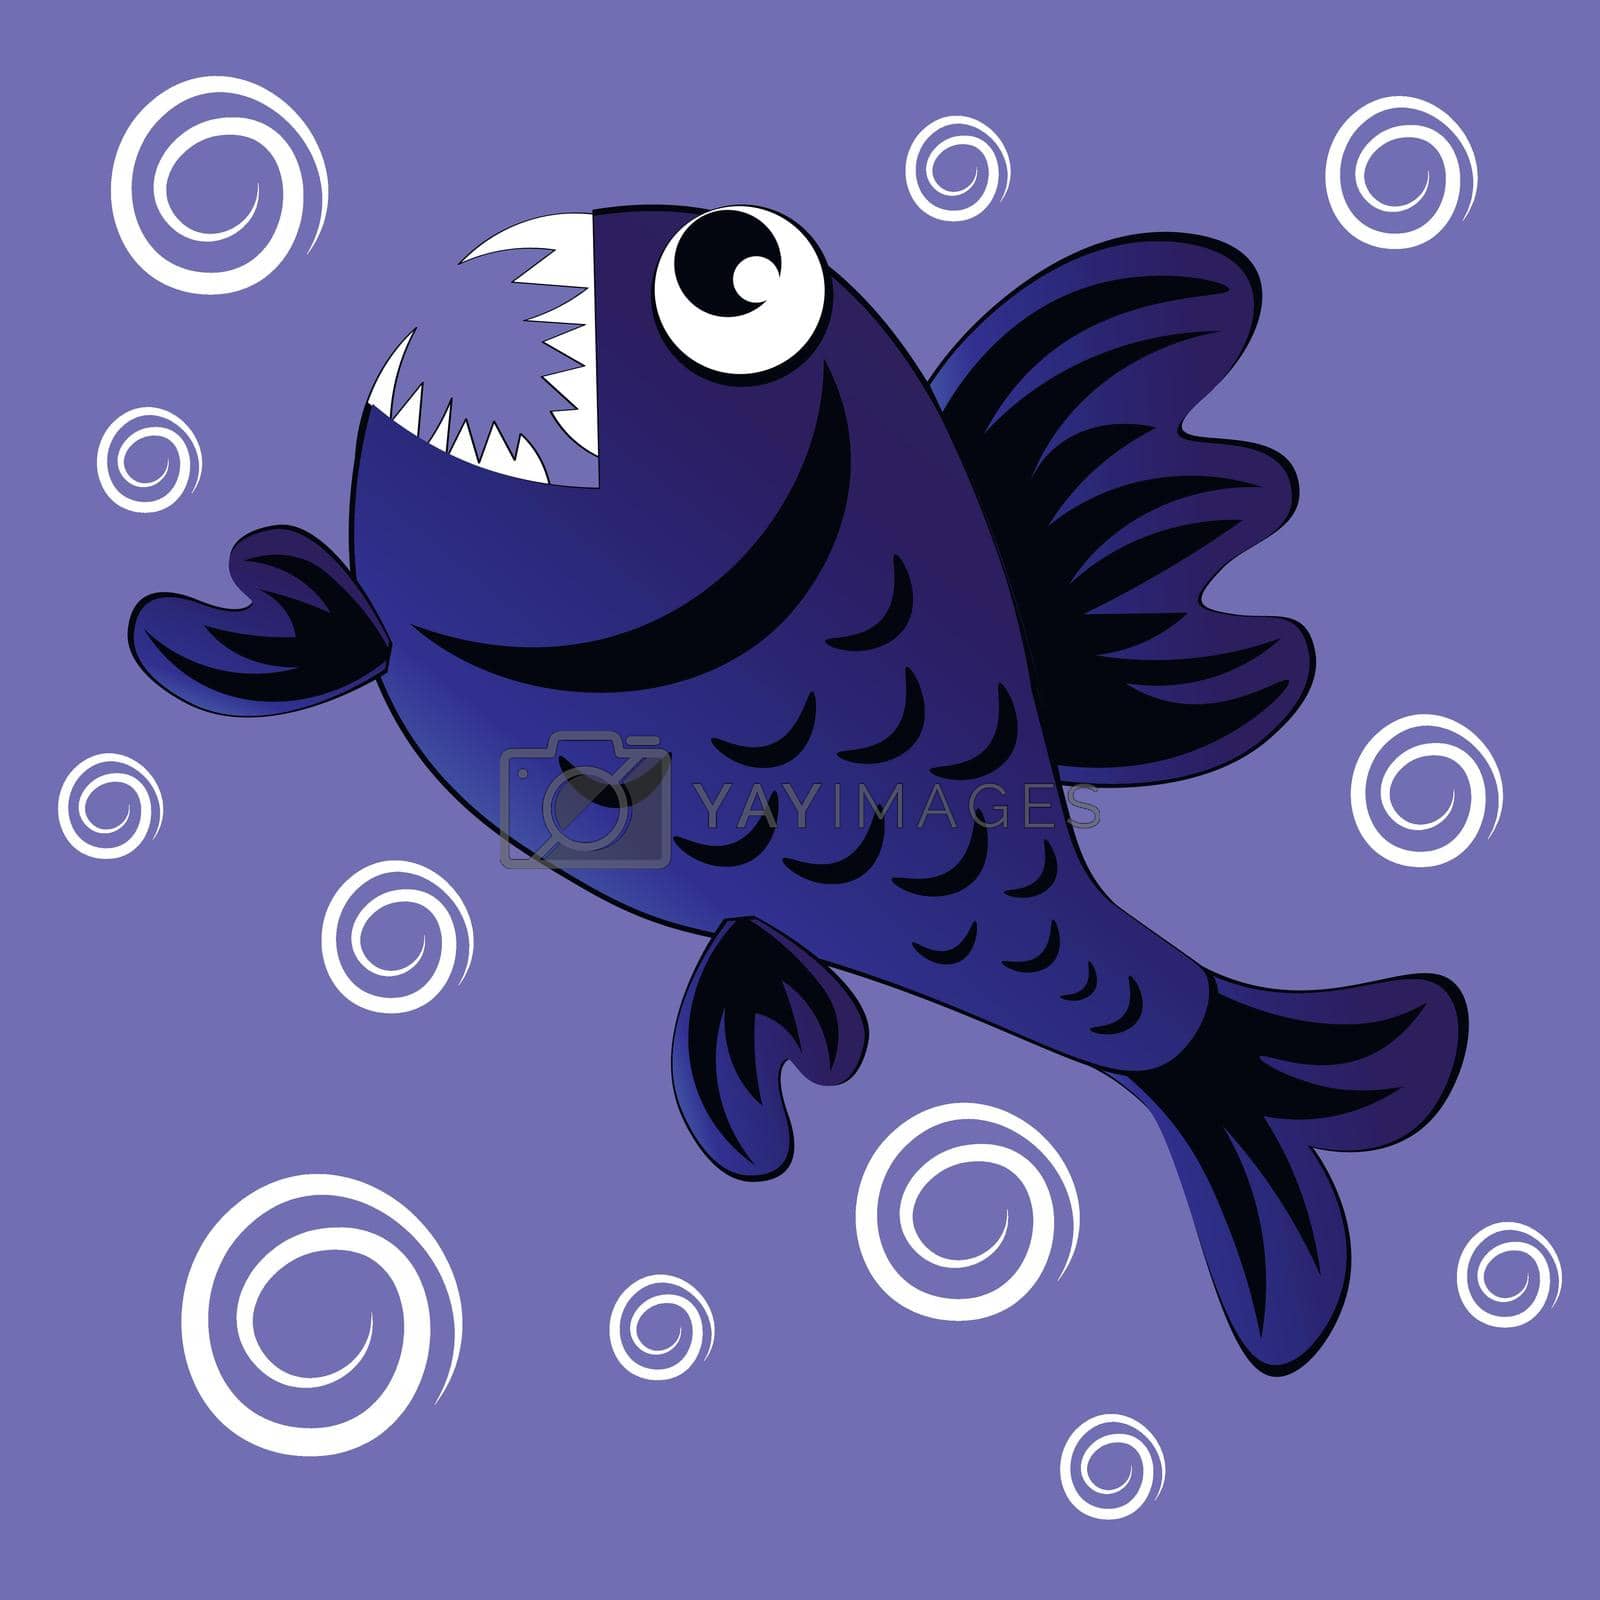 Royalty free image of predatory evil piranha fish. Fabulous underwater world. Styling, cartoon style by p-i-r-a-n-y-a